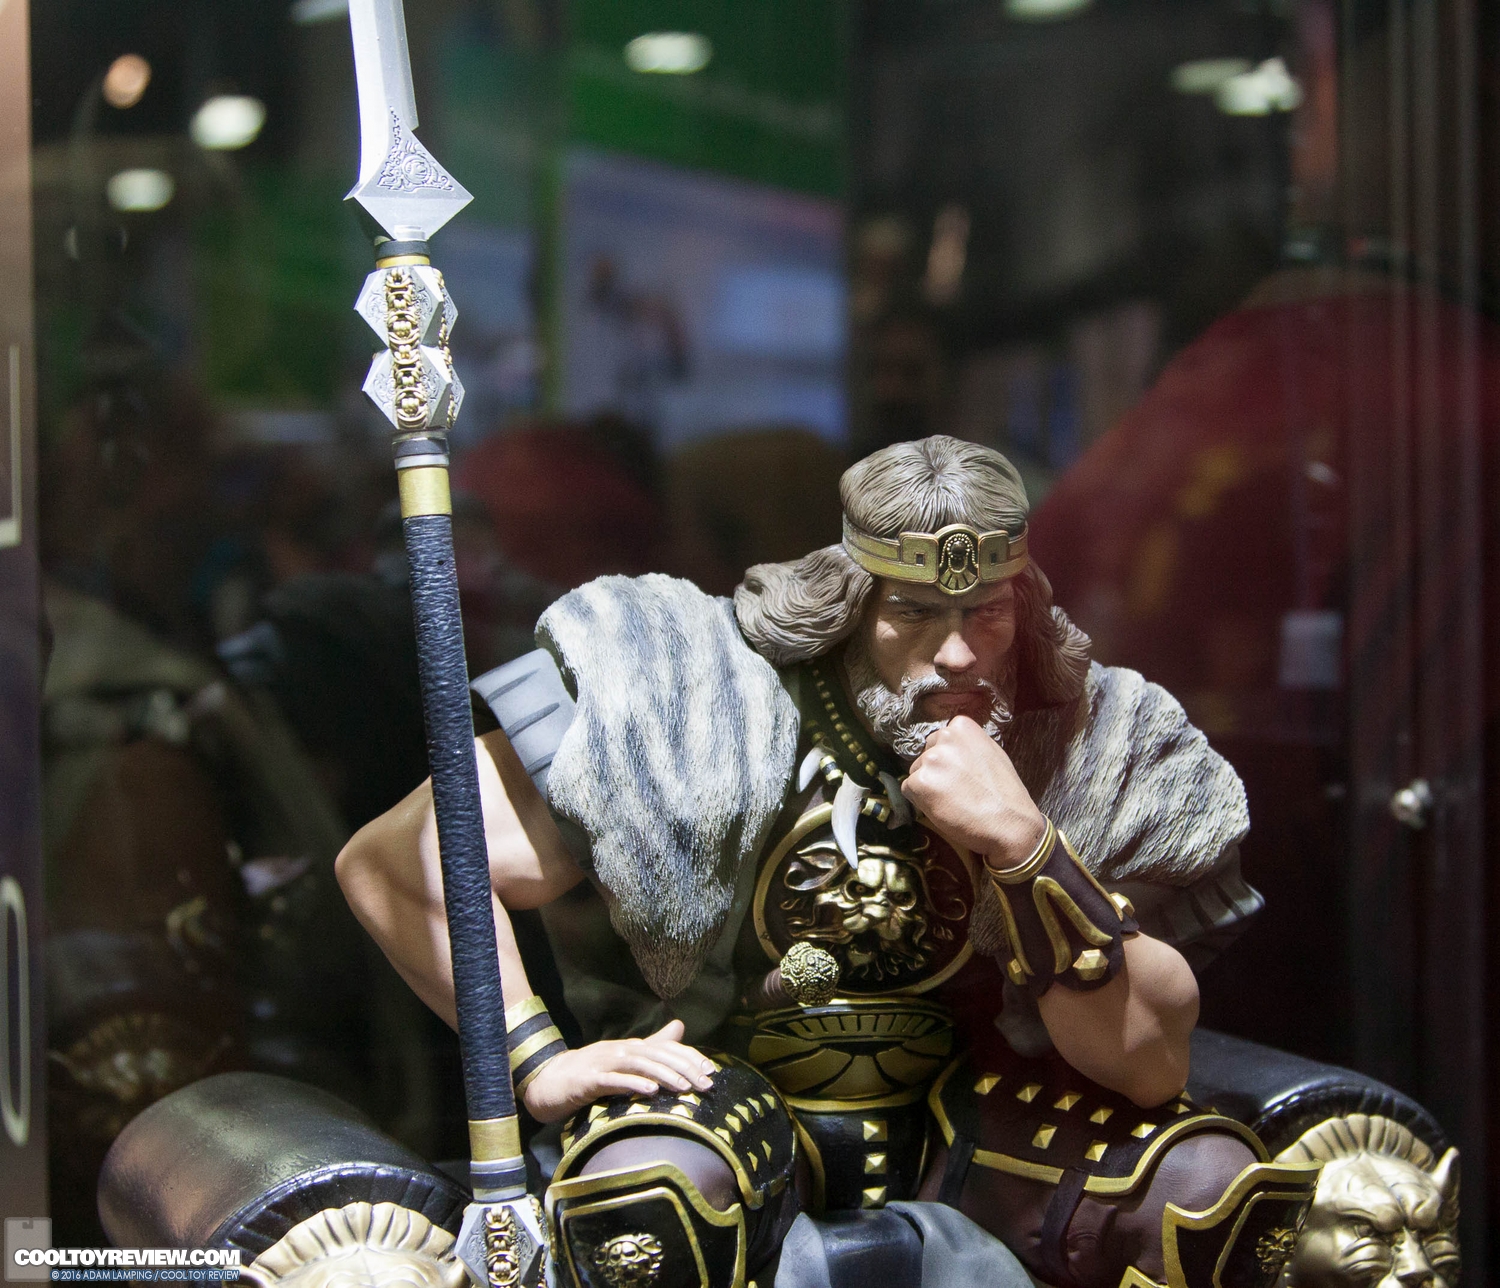 san-diego-comic-con-chronicle-collectibles-booth-003.jpg